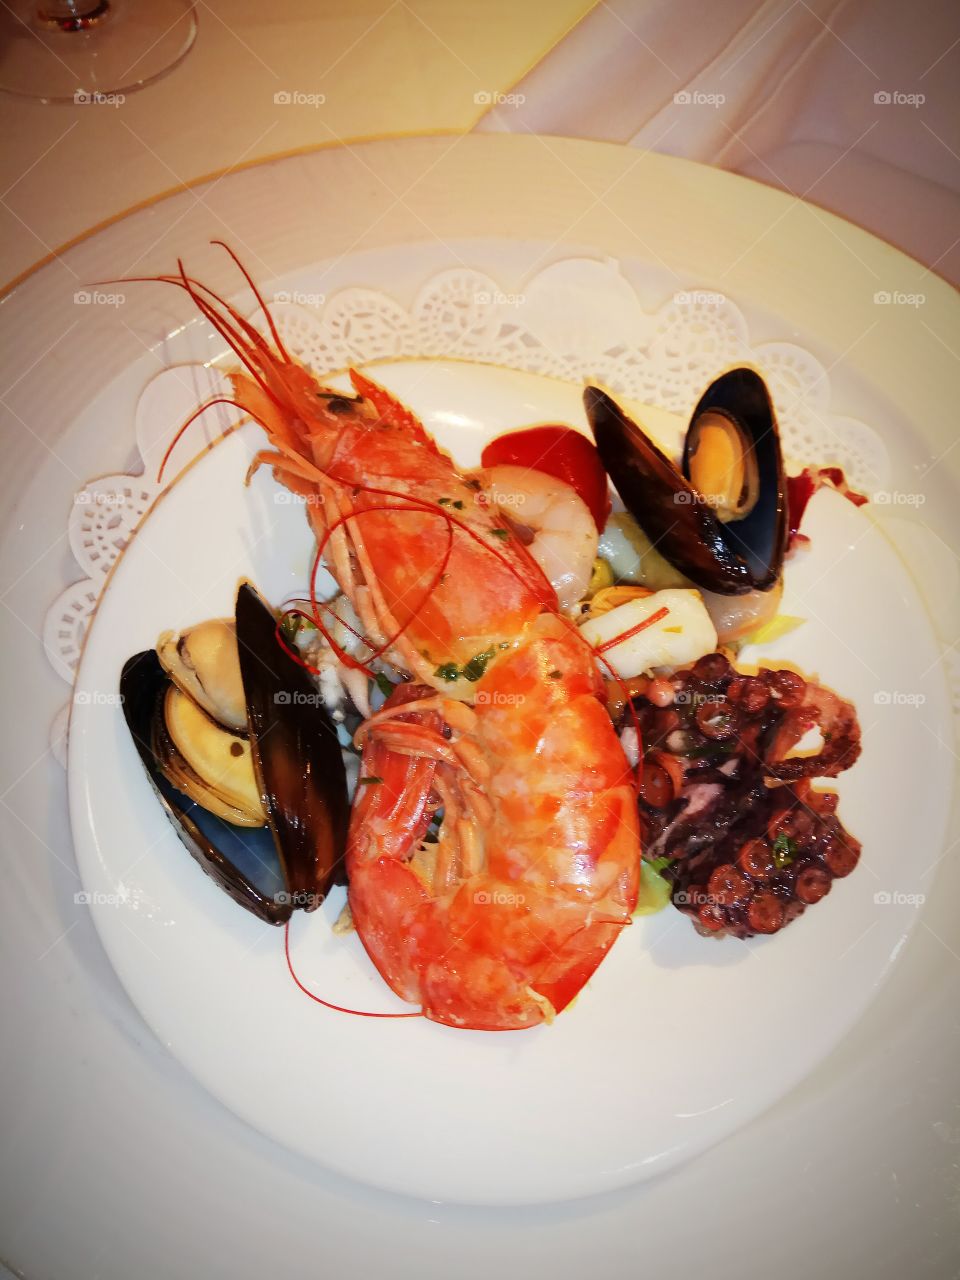 shrimp with mussels on a plate